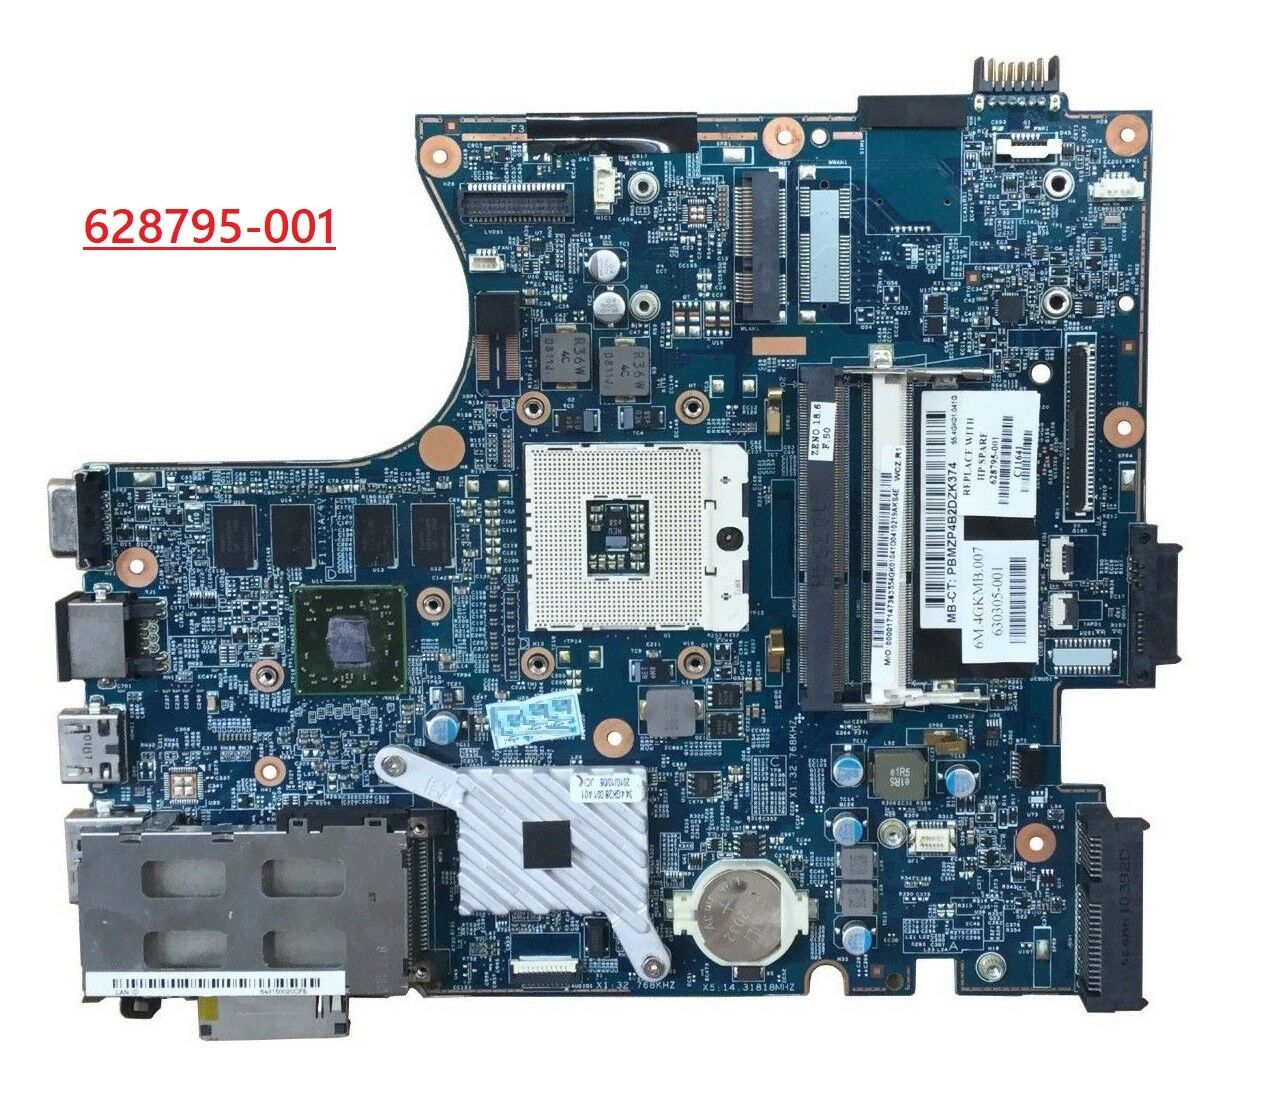 628795-001 Motherboard for PROBOOK 4520s 4720s series laptops, ATI 512MB Video A MPN: 628795-001 Compatibl